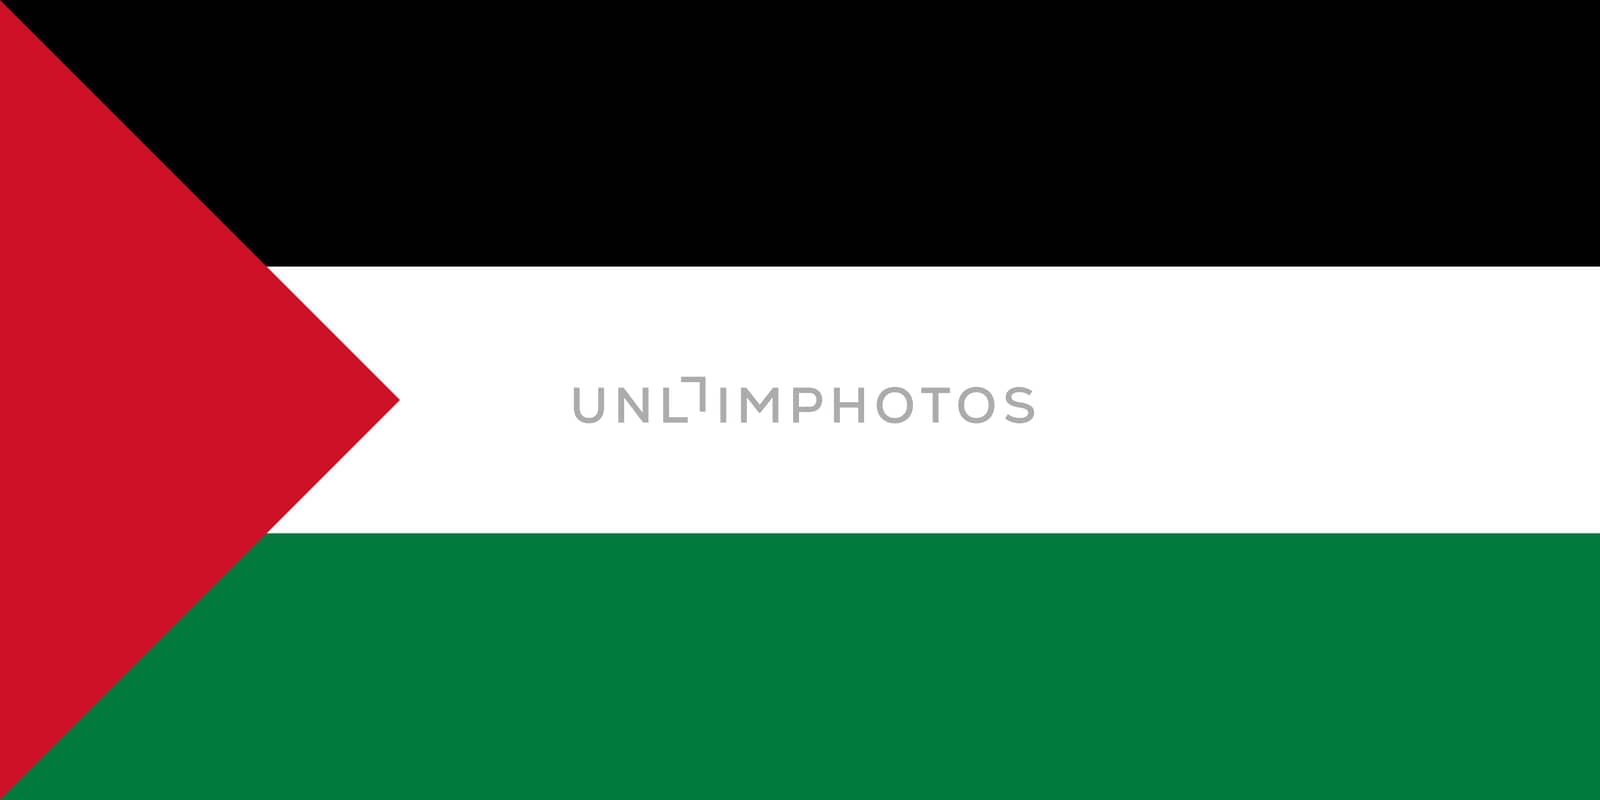 The national flag of Palestine by claudiodivizia